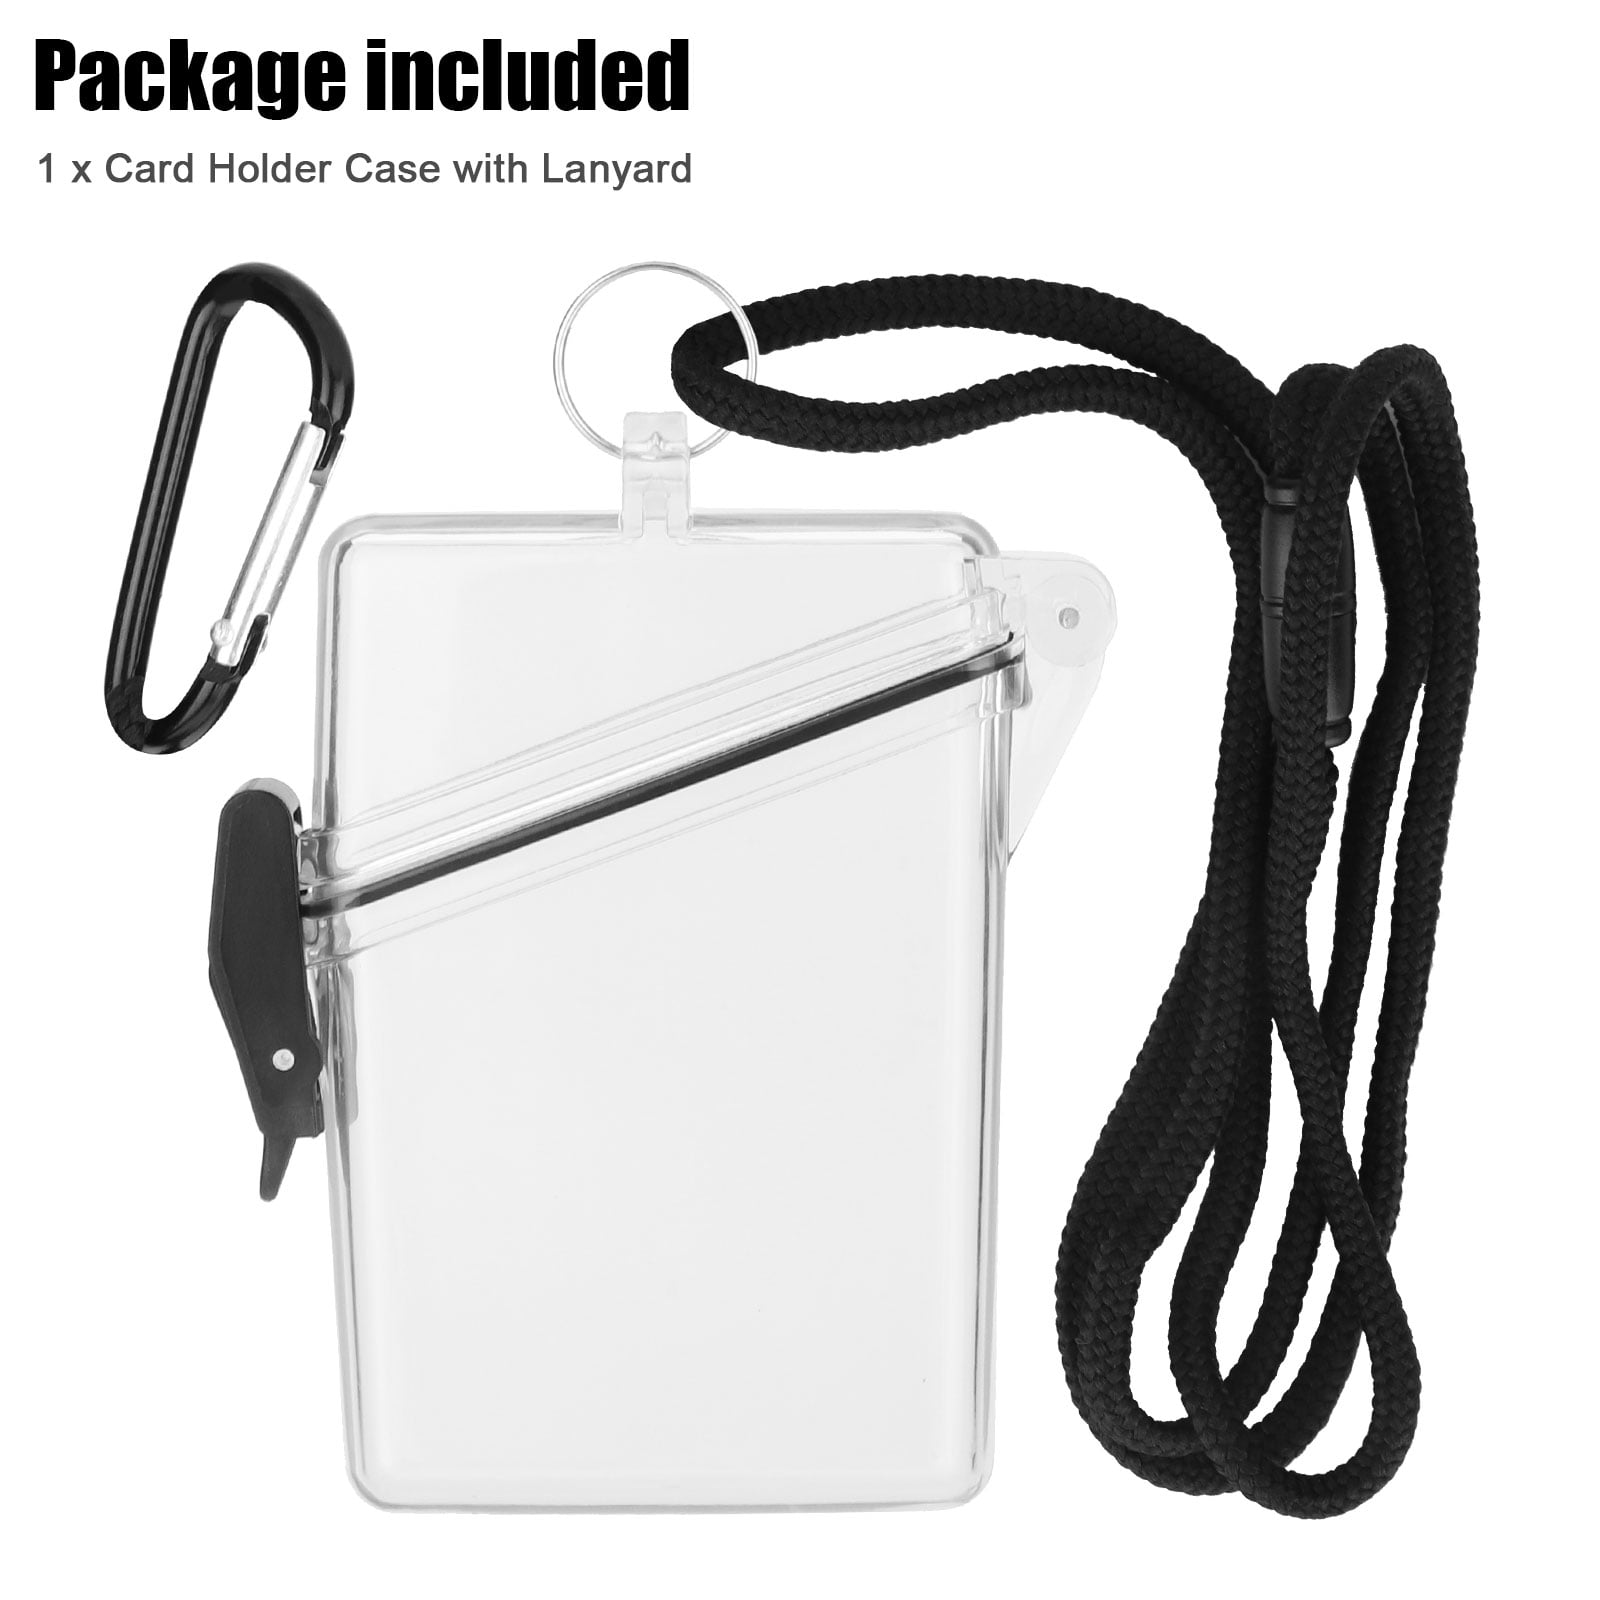 Watertight ID/Badge/Passport/Money Holder Case Great for Travel Outdoor Sports Tough Dust Resistant Perfeclan Waterproof Dry Box Multiple Colors 